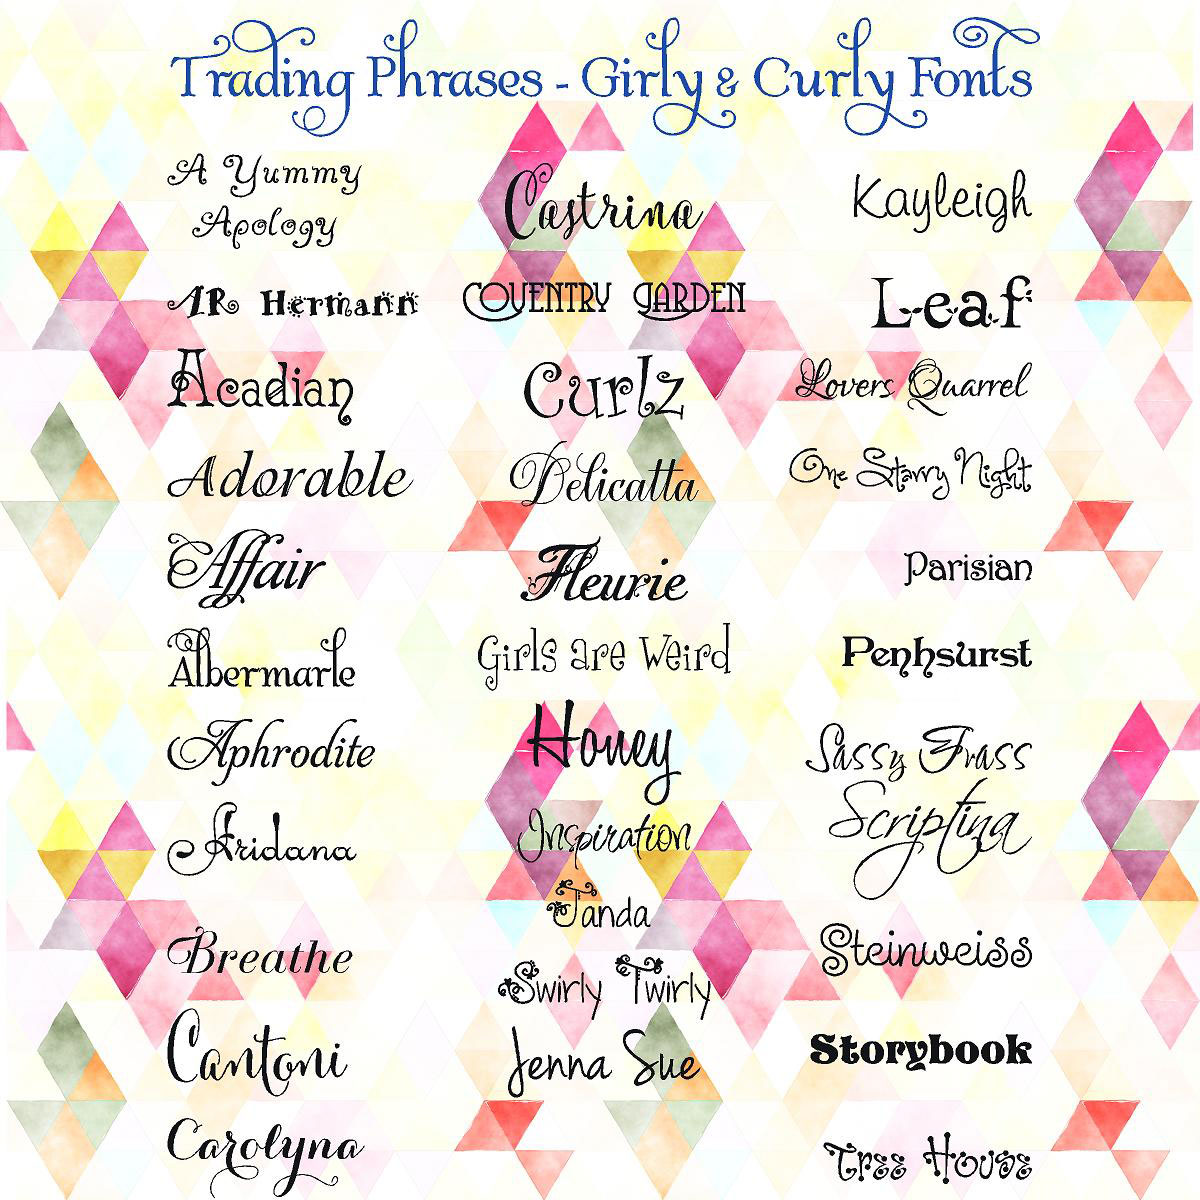 Trading Phrases Girly & Curly Fonts